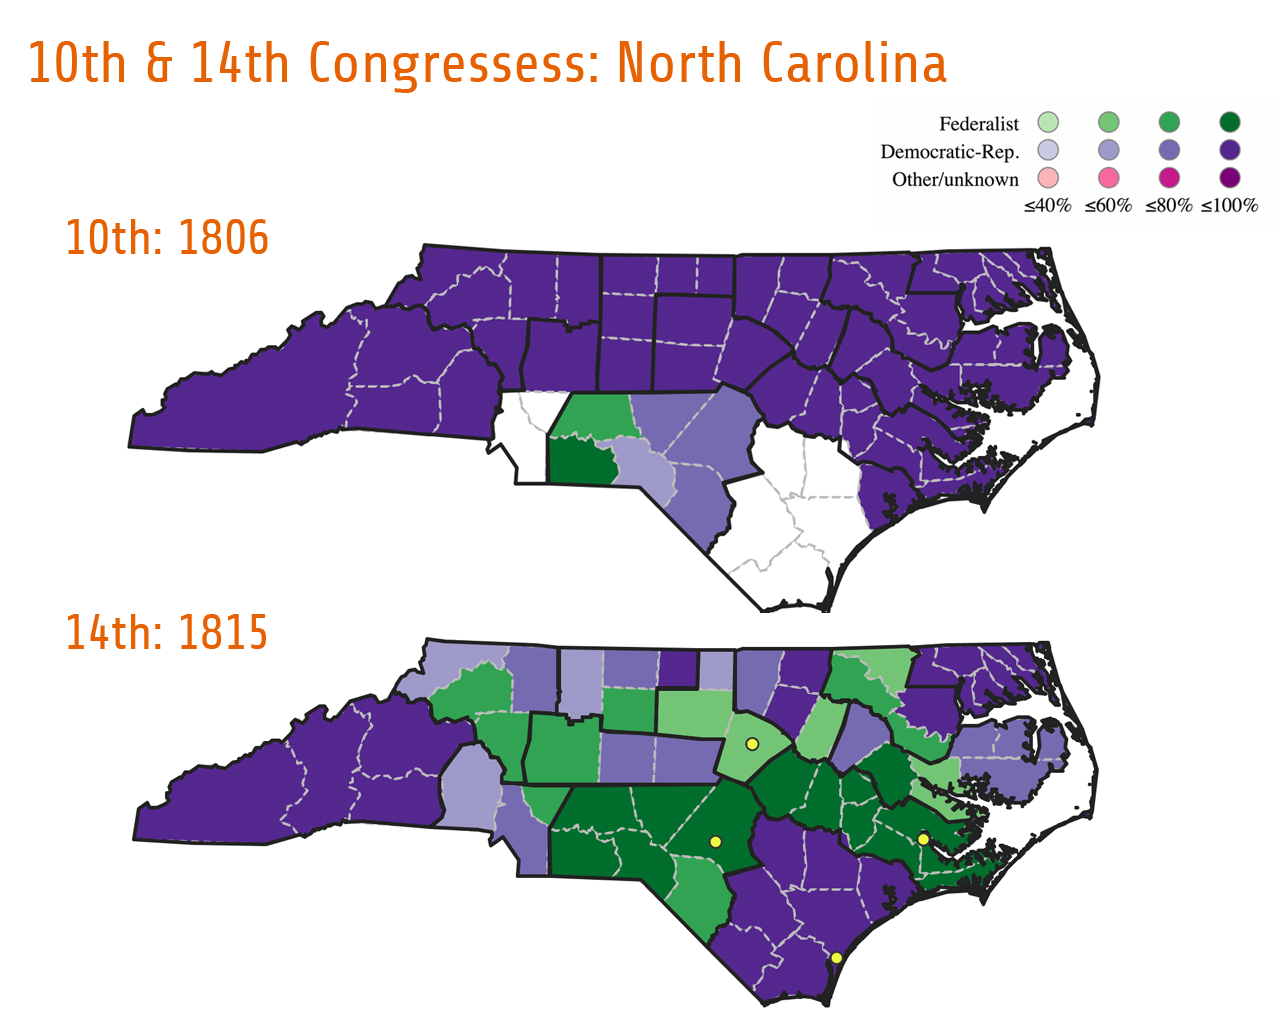 The top map, showing North Carolina’s election for the Tenth Congress, demonstrates the virtual disappearance of the Federalists (green) in the state between 1798 and 1806. In this election, the Federalists received a majority of the vote in only one district. However, during the War of 1812, the Federalists staged somewhat of a comeback. In North Carolina’s election for the Fourteenth Congress, shown in the the bottom map, more than one quarter of the elected representatives were Federalists.